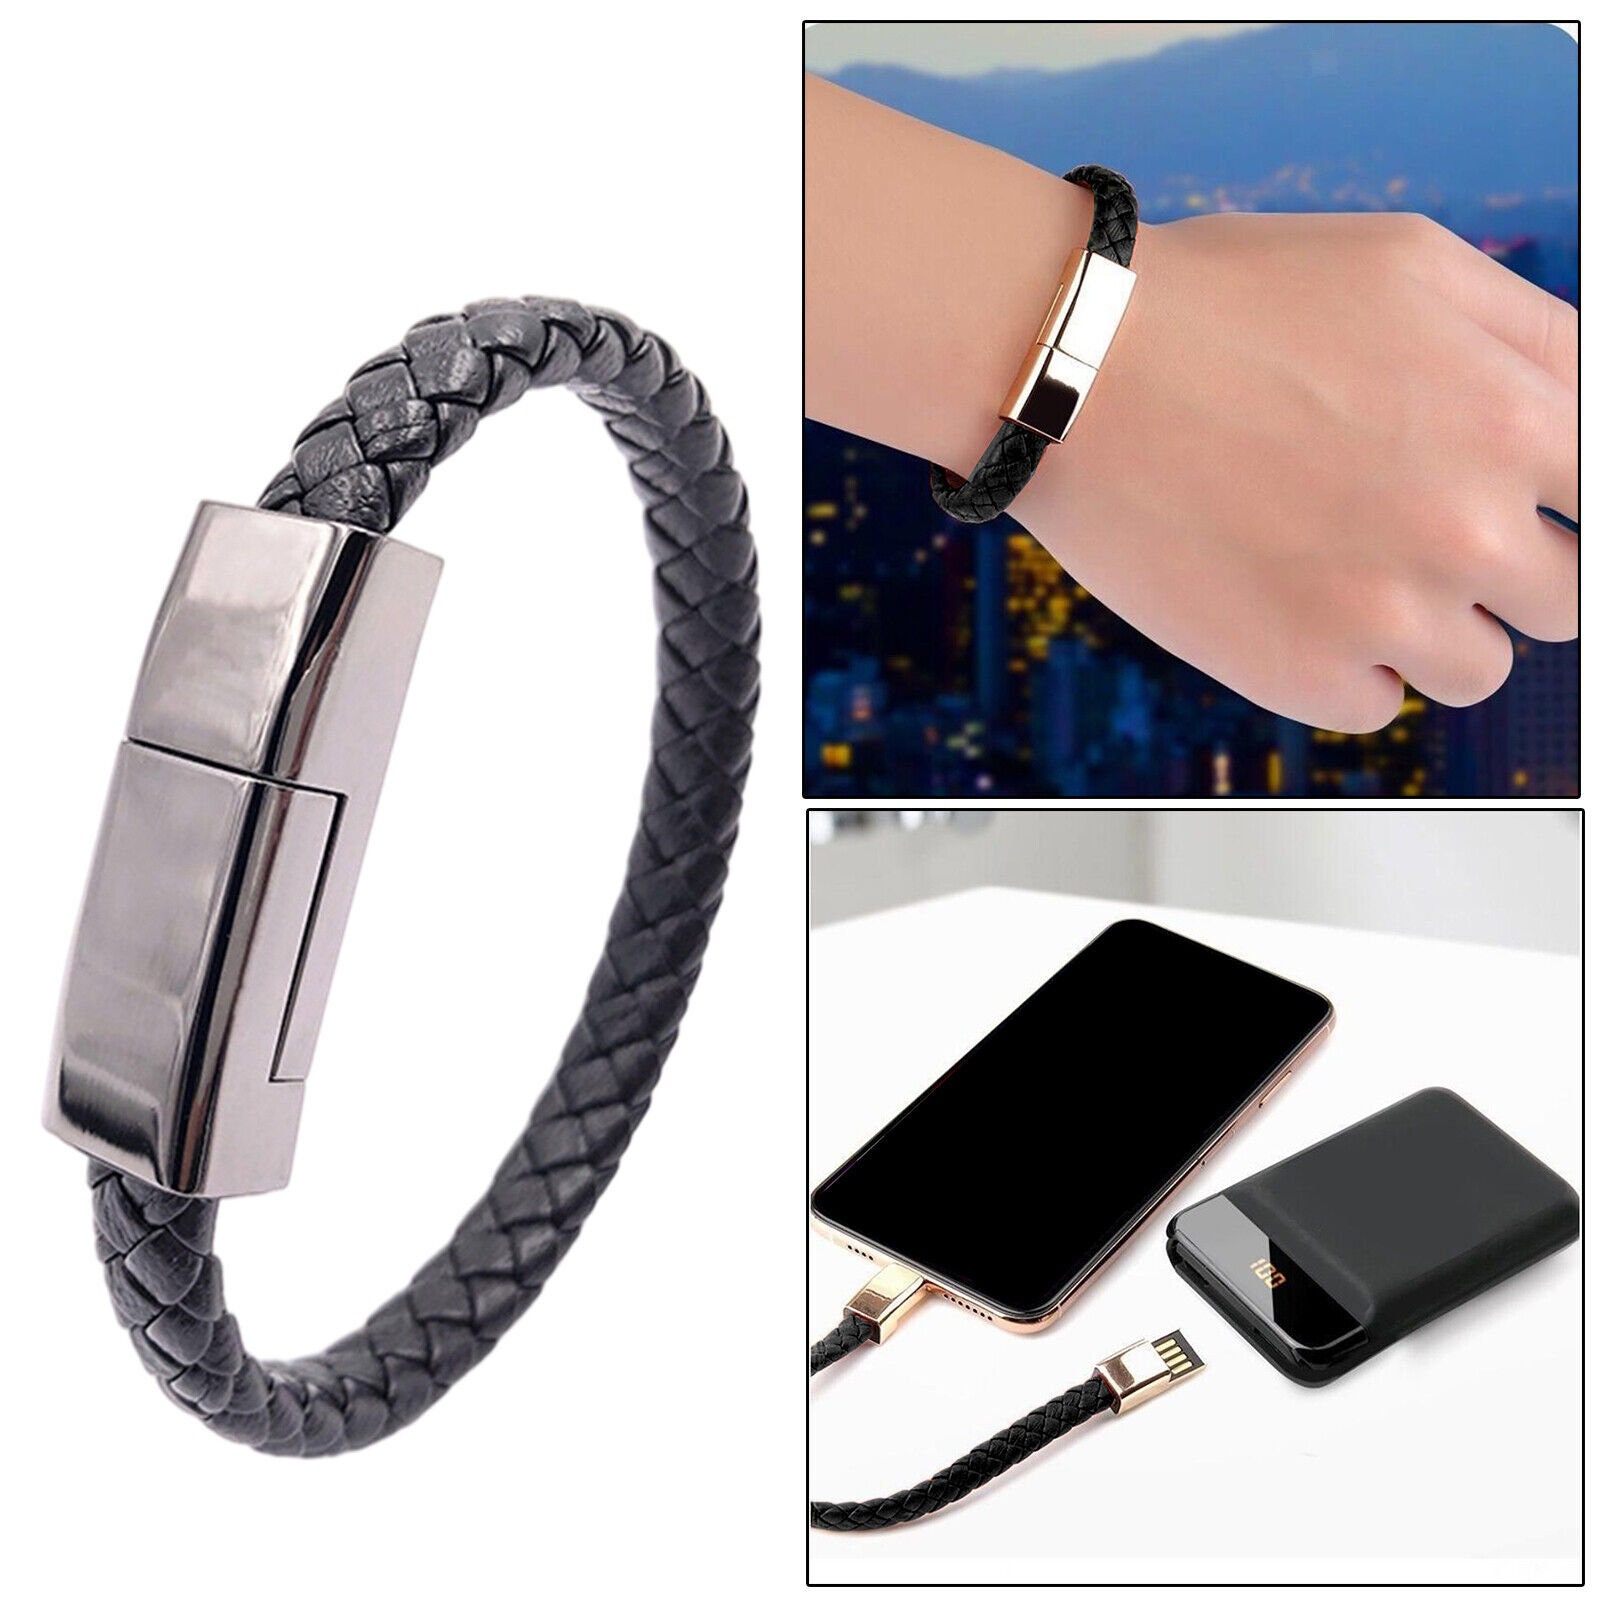 Worivo Leather Bracelet Link Charging Cable Braided Wrist Band USB Sync  Data Charger for iPhone Black M 85 Buy Worivo Leather Bracelet Link  Charging Cable Braided Wrist Band USB Sync Data Charger